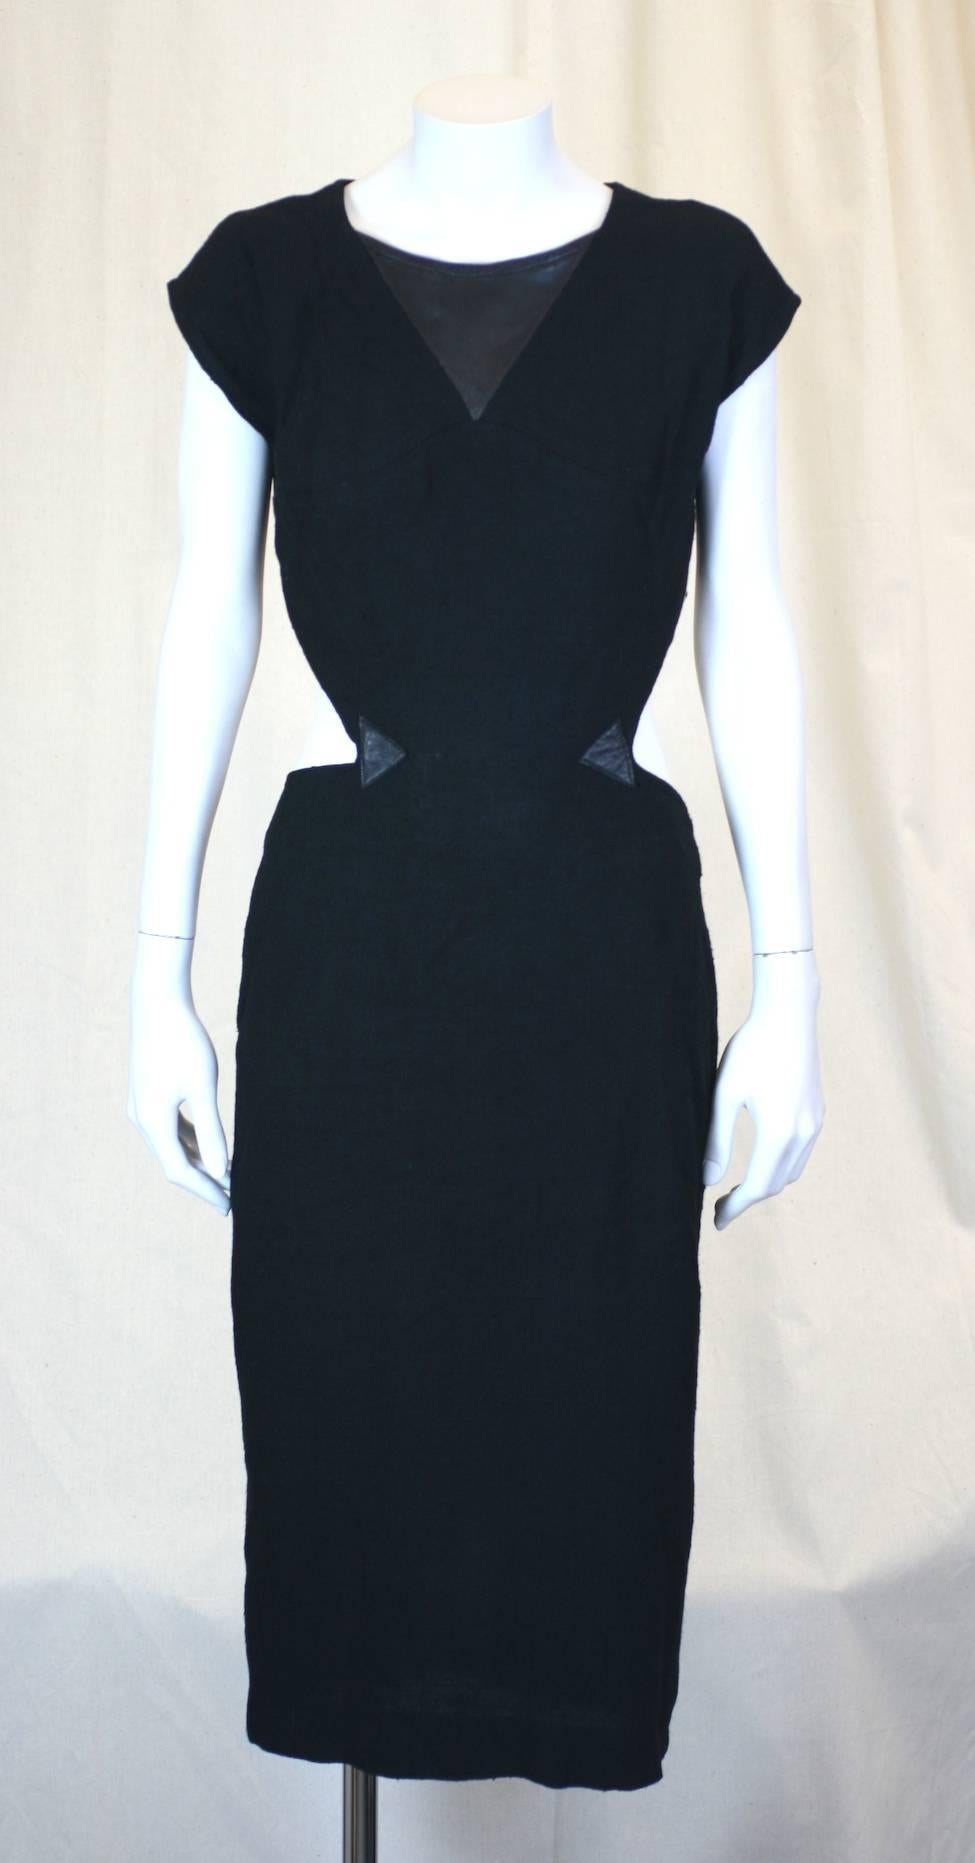 Deceptively sexy Black Linen and Leather Cutaway Buckle Dress, Malbruno, Paris. 
Demure front has a cutaways extending from rear which are reinforced with leather triangles. 
There are bondage style leather trimmed buckles at the neck, back and